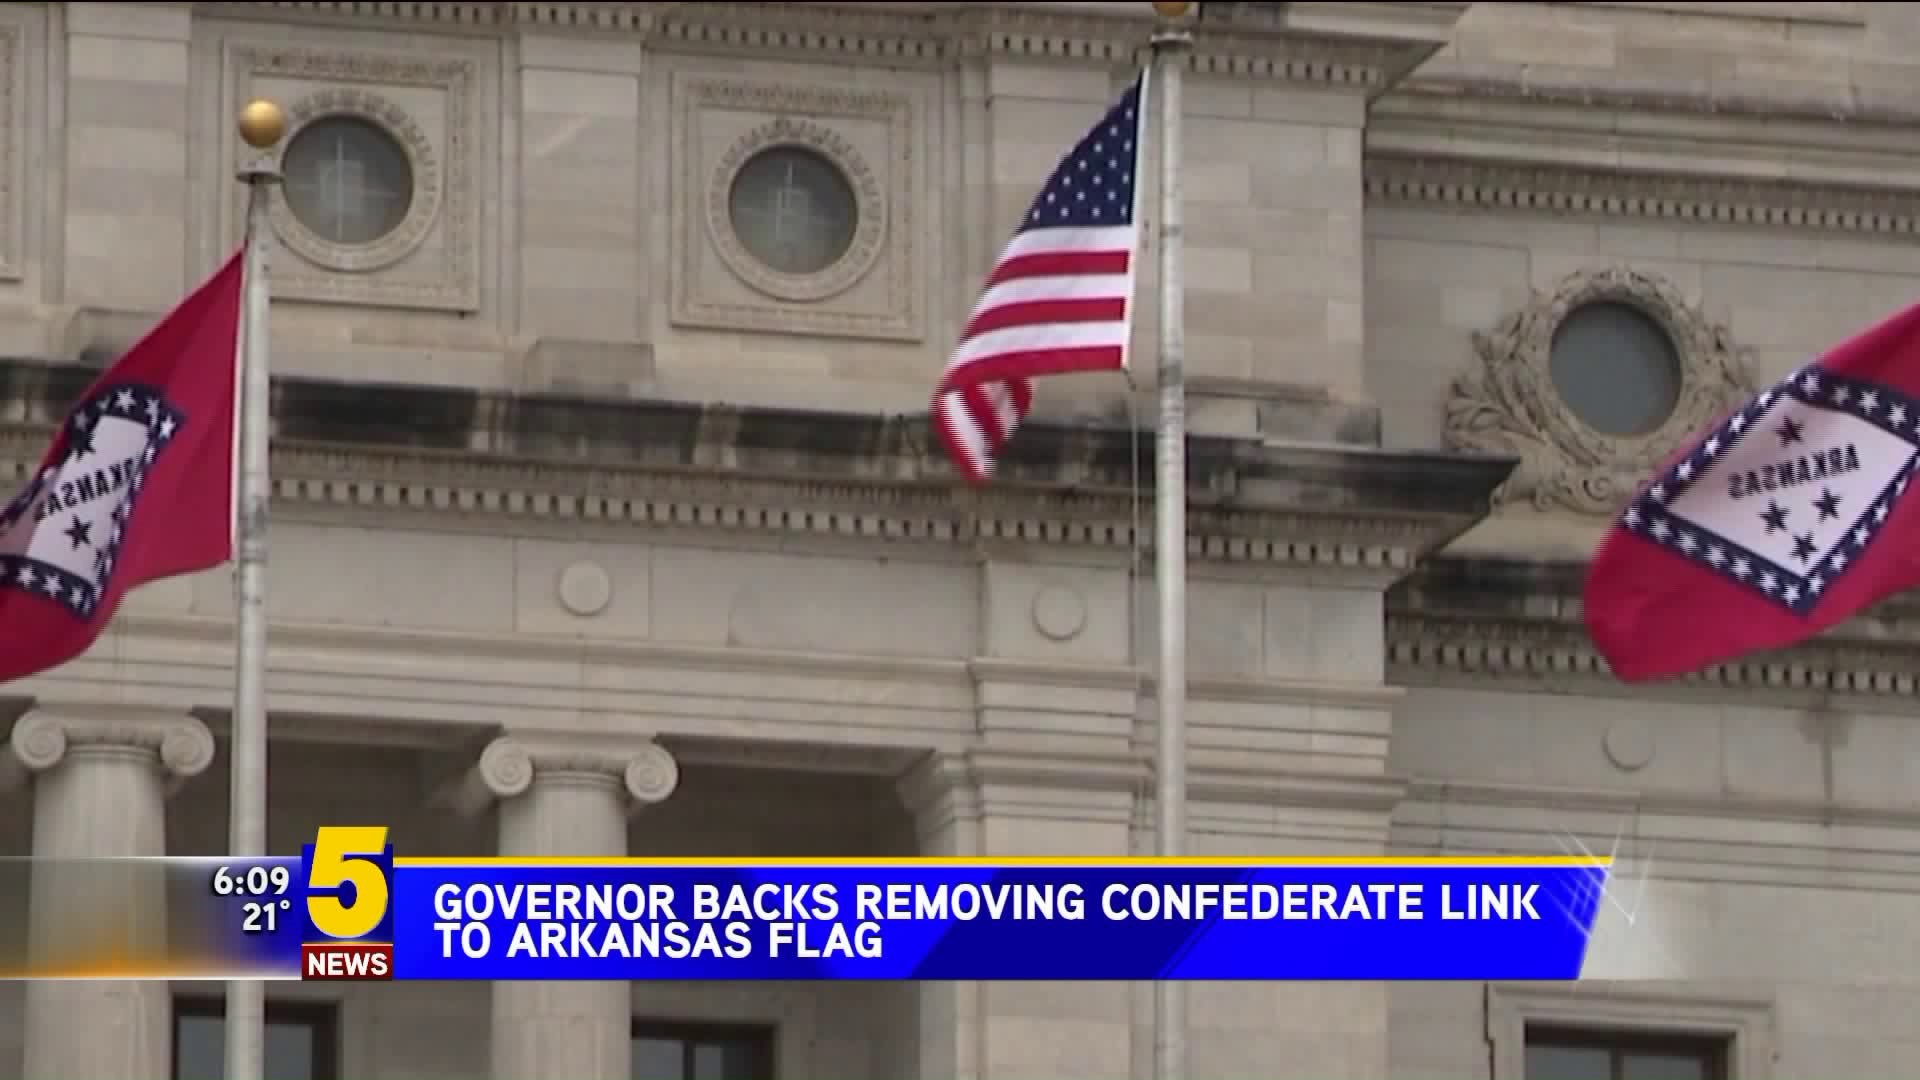 Gov. Supports Removing Confederate Link To Arkansas Flag